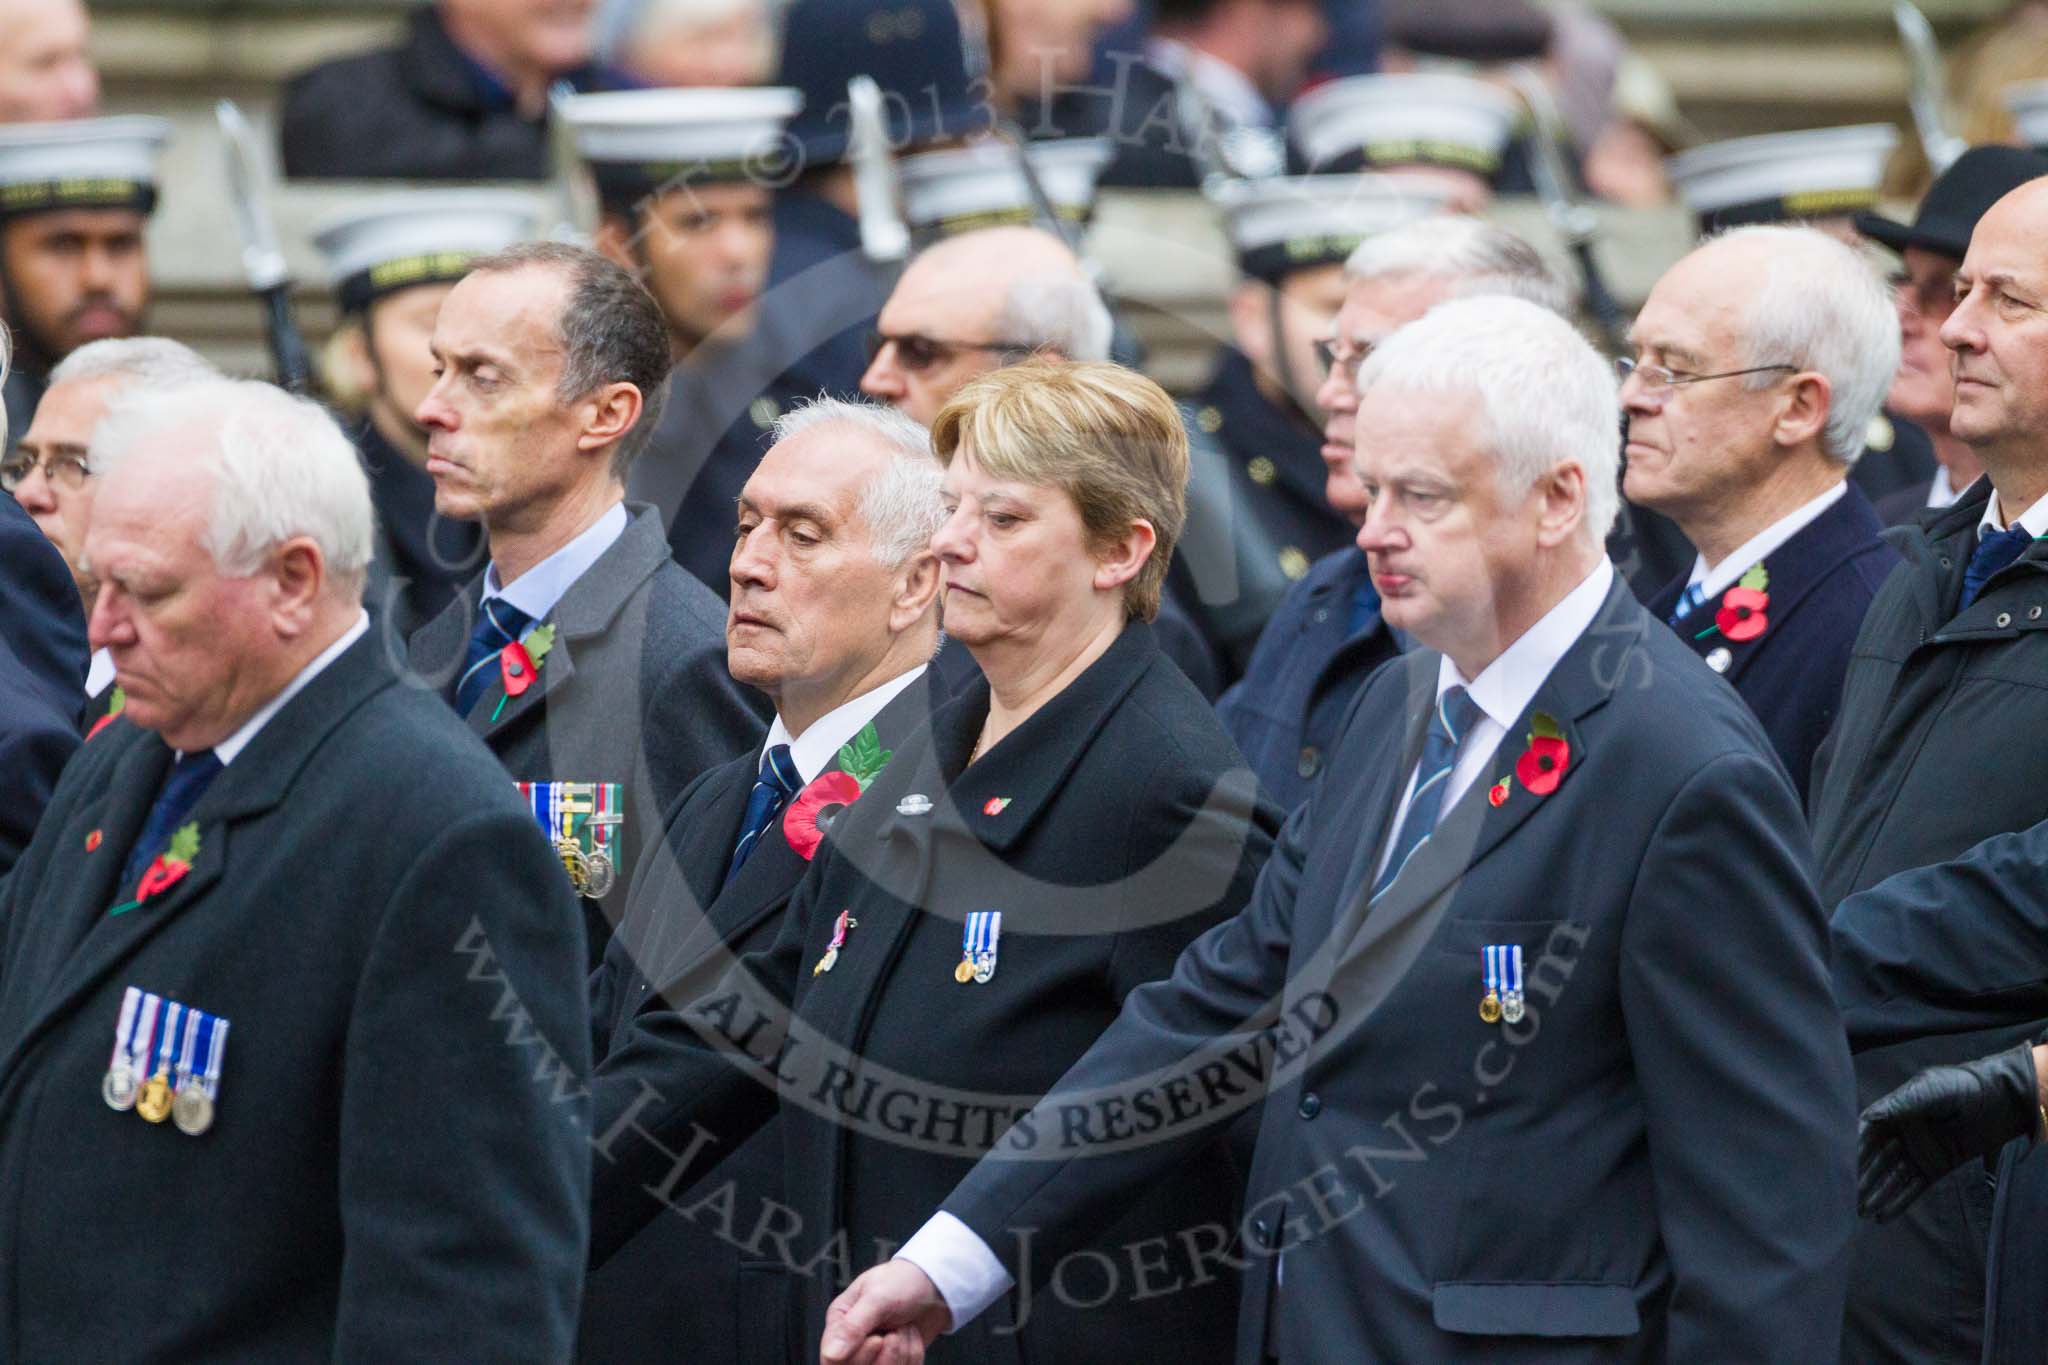 Remembrance Sunday at the Cenotaph 2015: Group M11, National Association of Retired Police Officers.
Cenotaph, Whitehall, London SW1,
London,
Greater London,
United Kingdom,
on 08 November 2015 at 12:15, image #1467